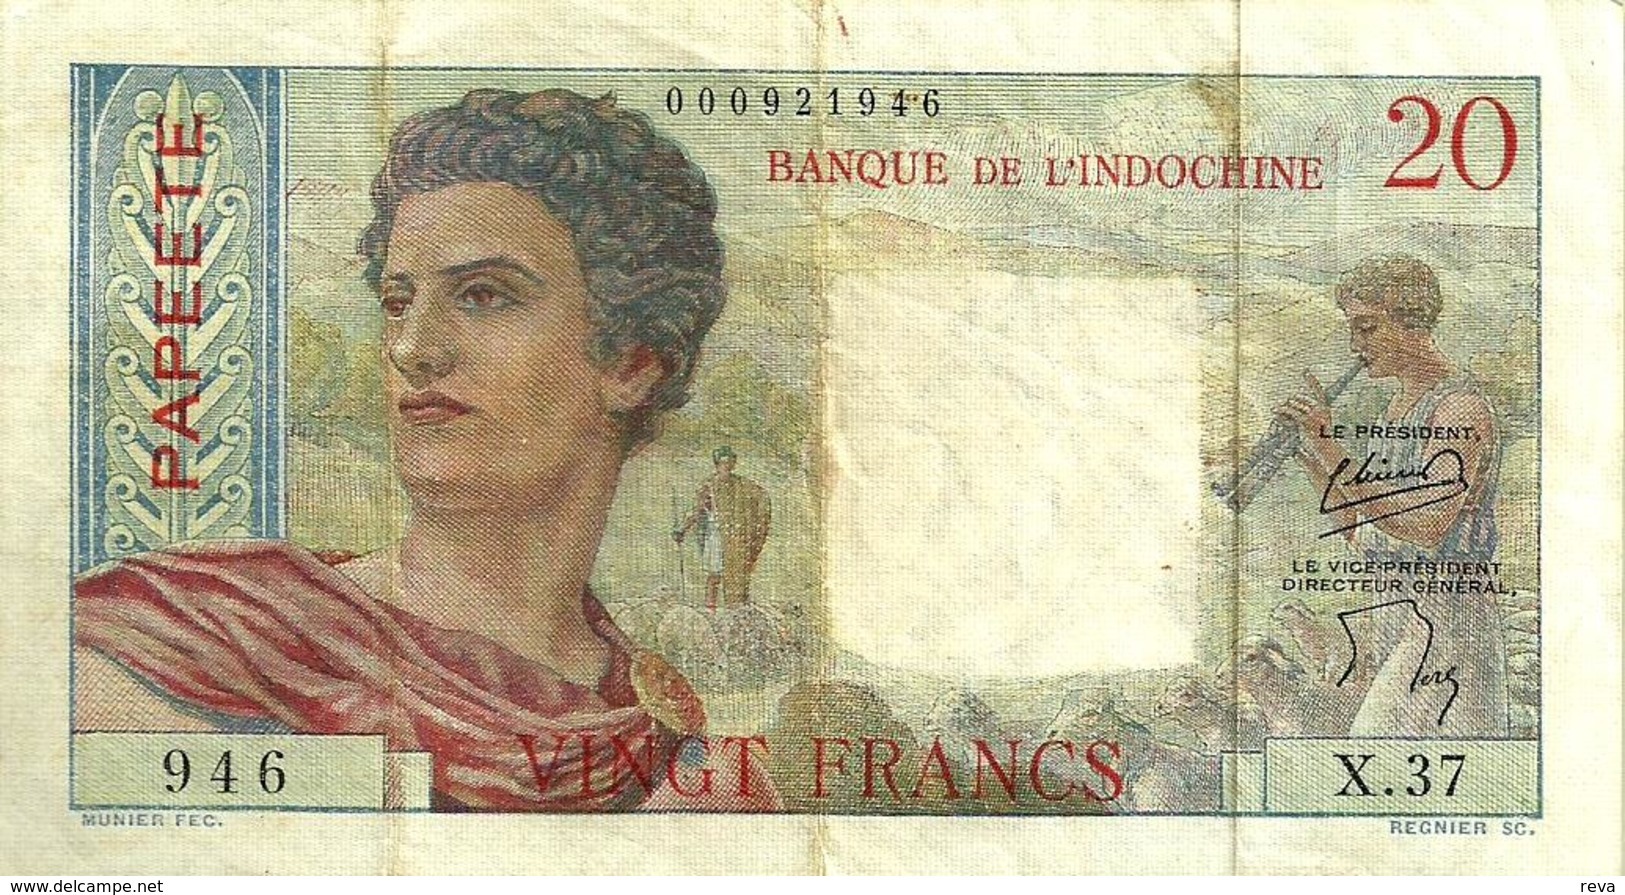 FRENCH POLYNESIA 20 FRANCS GREY MAN HEAD FRONT WOMAN BACK NOT DATED(1951) P21a 1ST SIG VARIETY F READ DESCRIPTION!! - Papeete (French Polynesia 1914-1985)